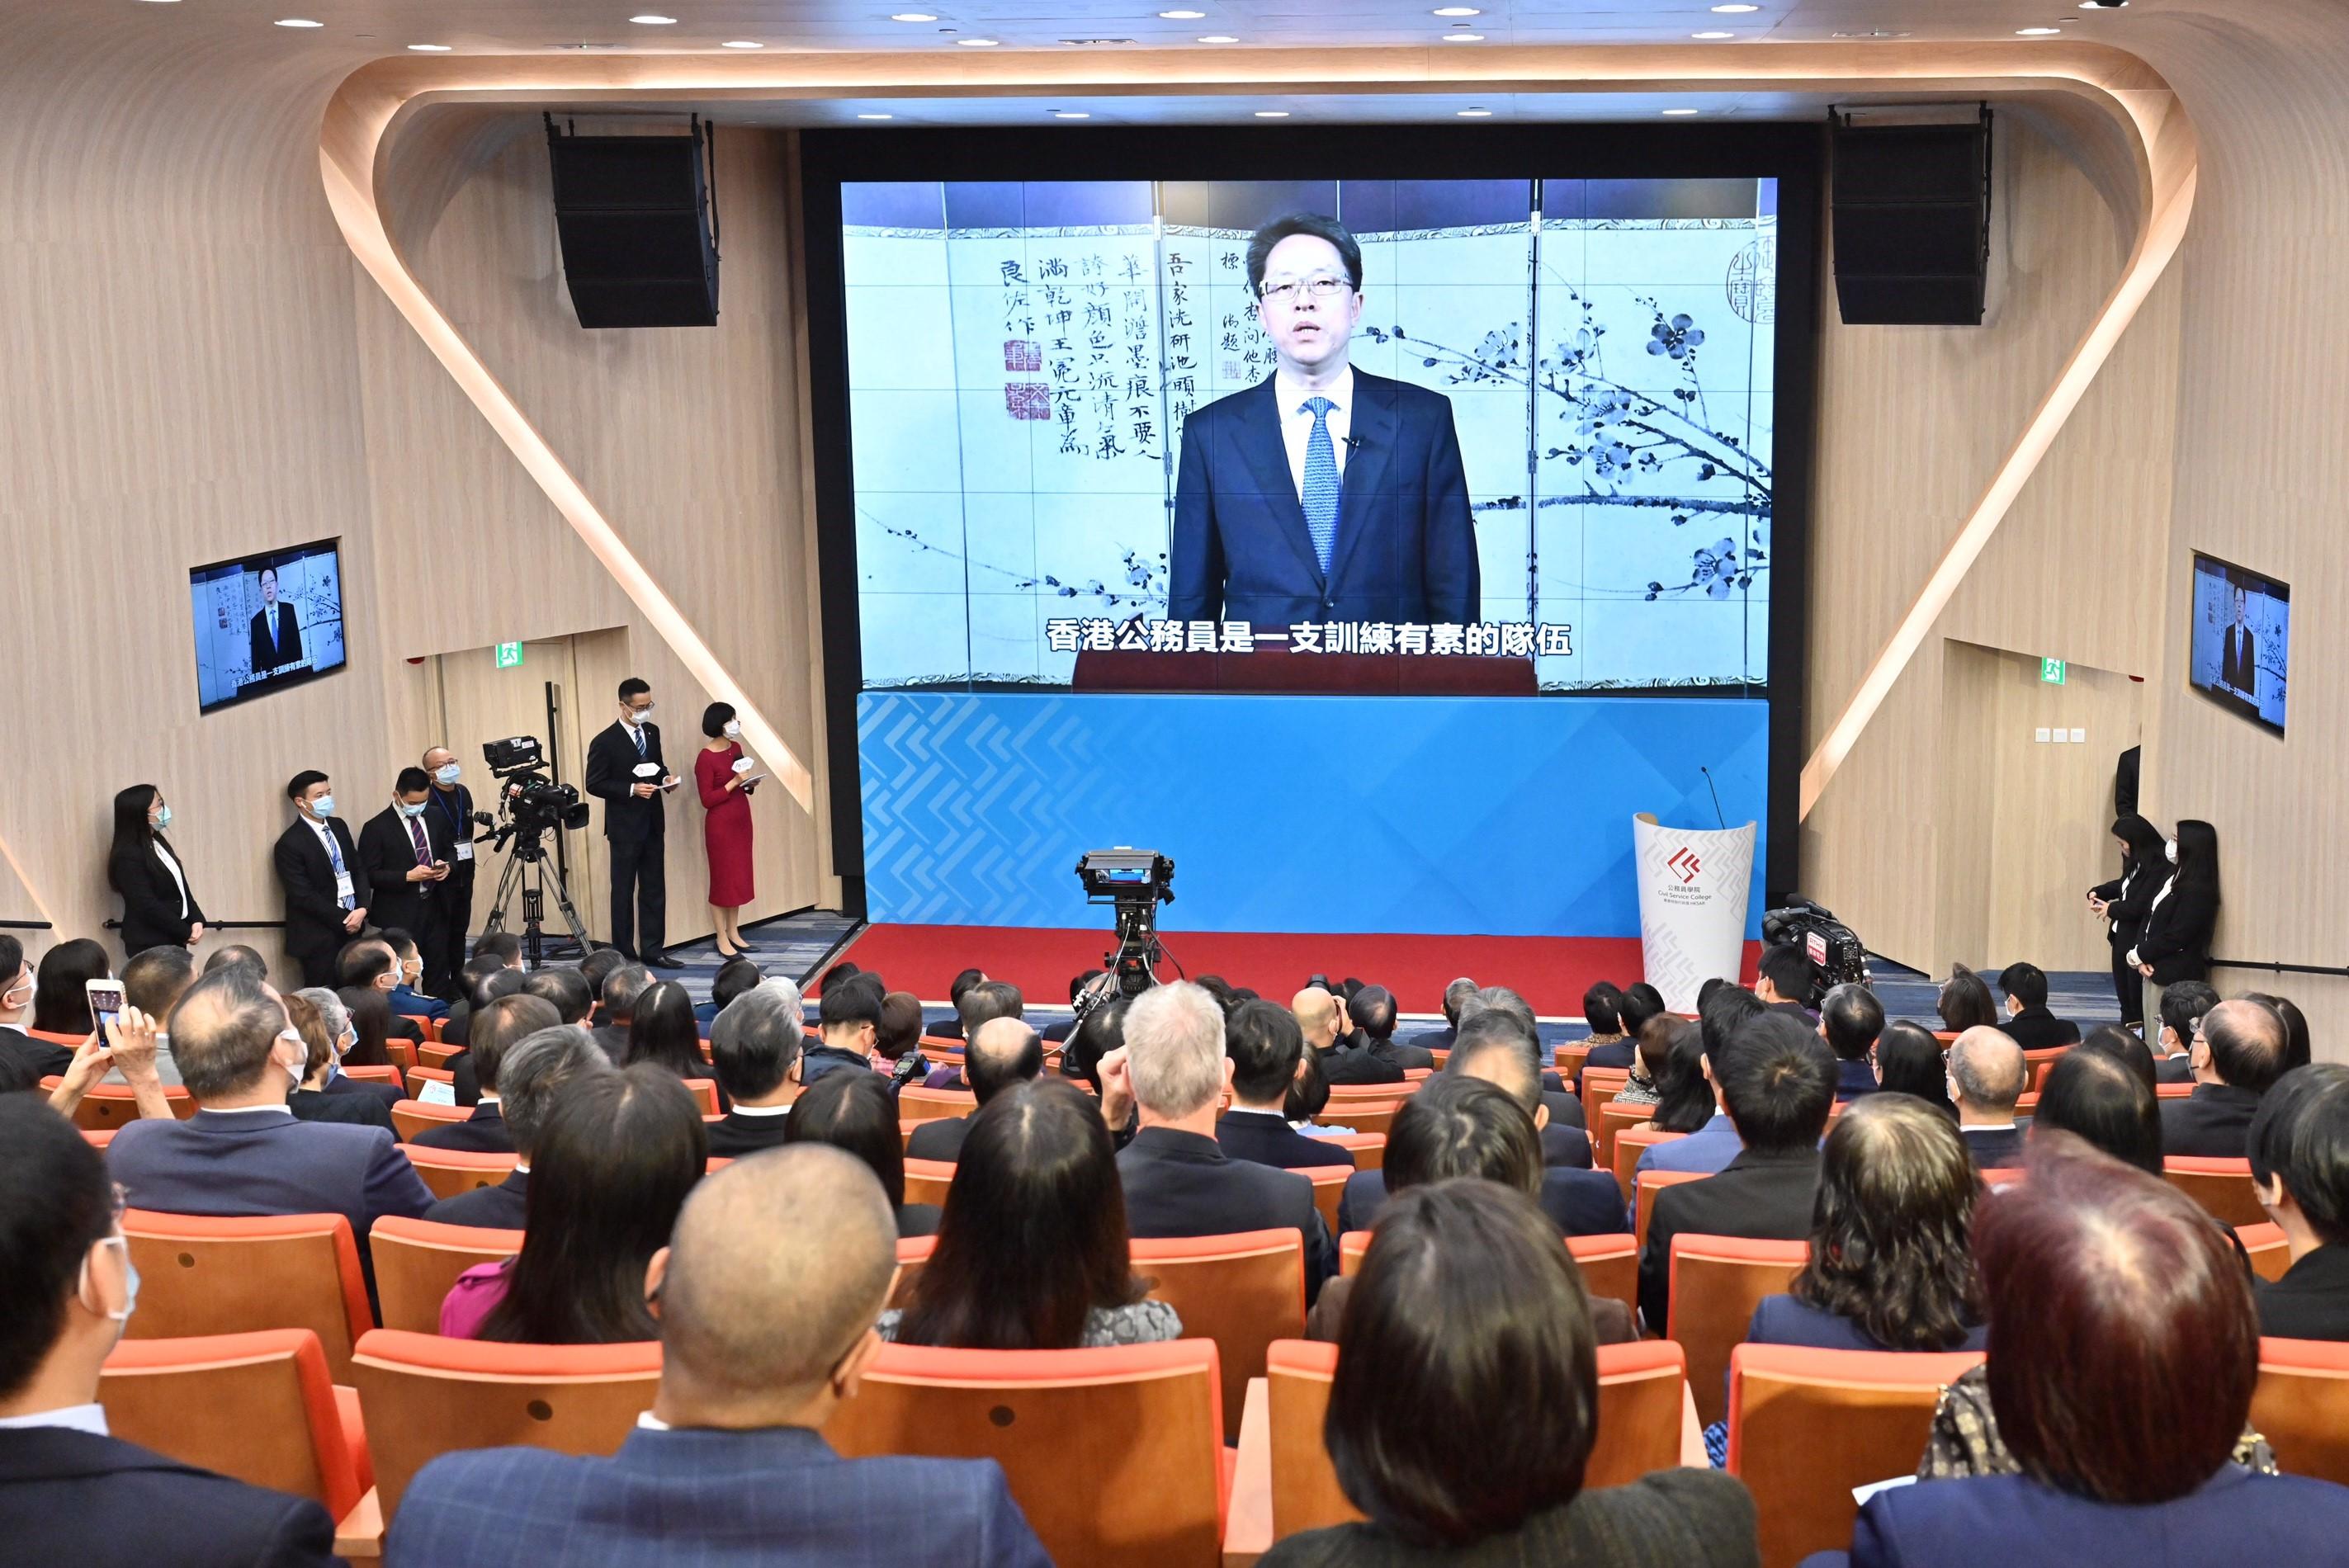 The Civil Service College of the Hong Kong Special Administrative Region was established today (December 9), marking a new milestone for training and development for the civil service. Photo shows the Executive Deputy Director of the Hong Kong and Macao Affairs Office of the State Council, Mr Zhang Xiaoming, giving a video speech at the establishment ceremony.